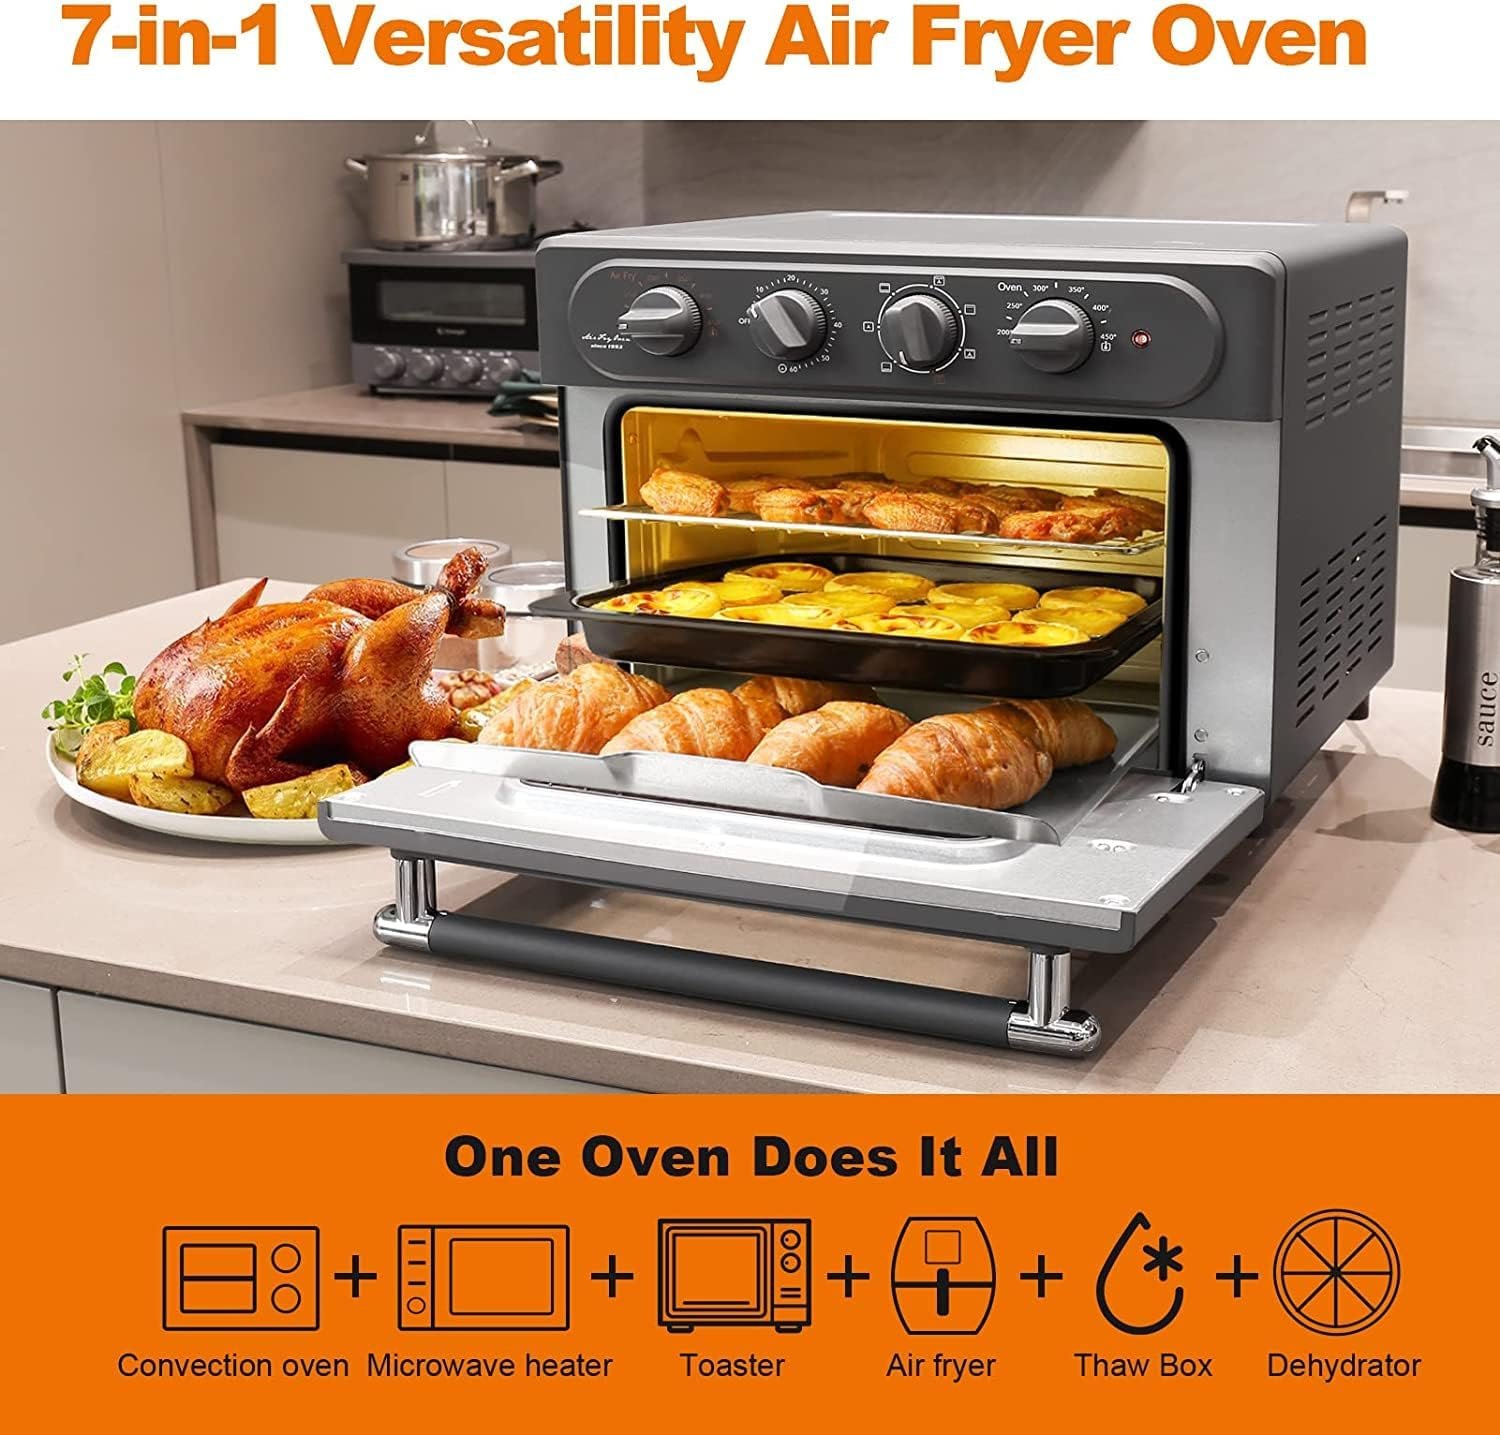 WEESTA Air Fryer Toaster Oven Combo, 24.5 QT Large Air Fryer, 7-in-1 Convection Toaster Oven with Air Fryer, Roast, Bake, Broil, Reheat, Large Toaster Oven, 5 Accessories  E-Recipes, UL Certified, Up to 450°F, 1500W (Dark Gray)